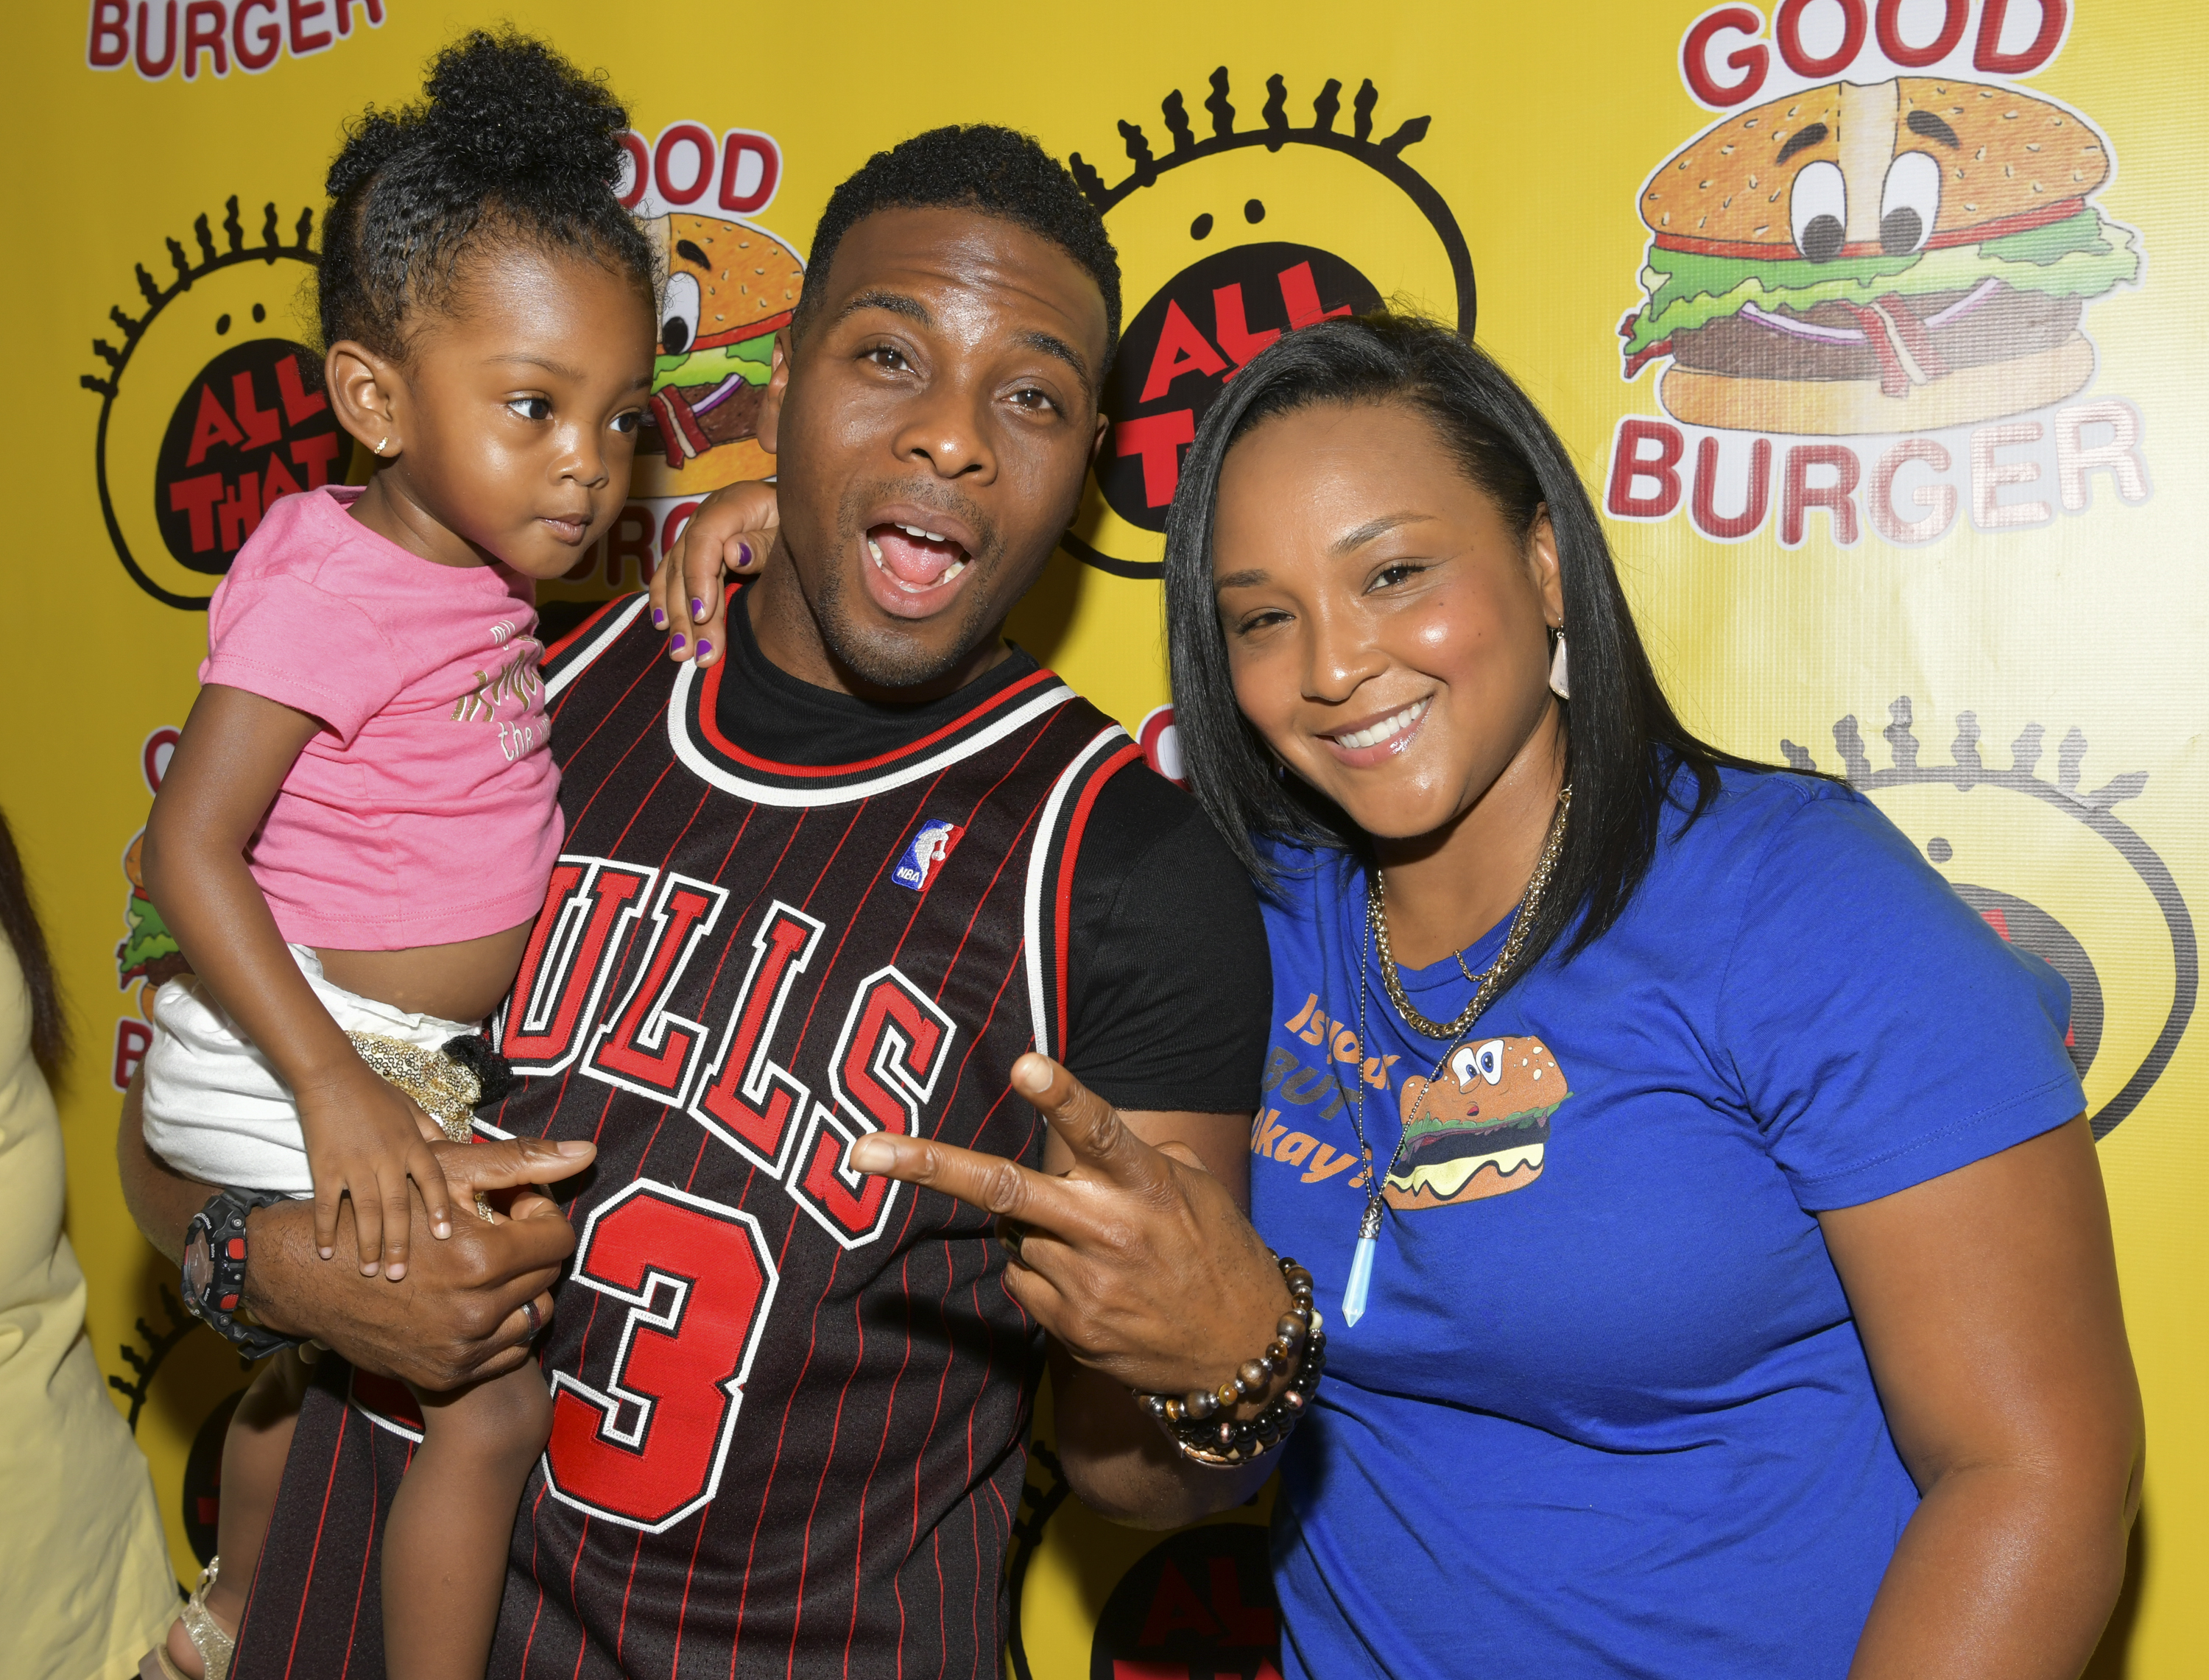 Kel Mitchell, Asia Lee, and Wisdom Mitchell at the grand opening party for Nickelodeon's "Good Burger" pop-up diner on July 08, 2019, in West Hollywood, California. | Source: Getty Images